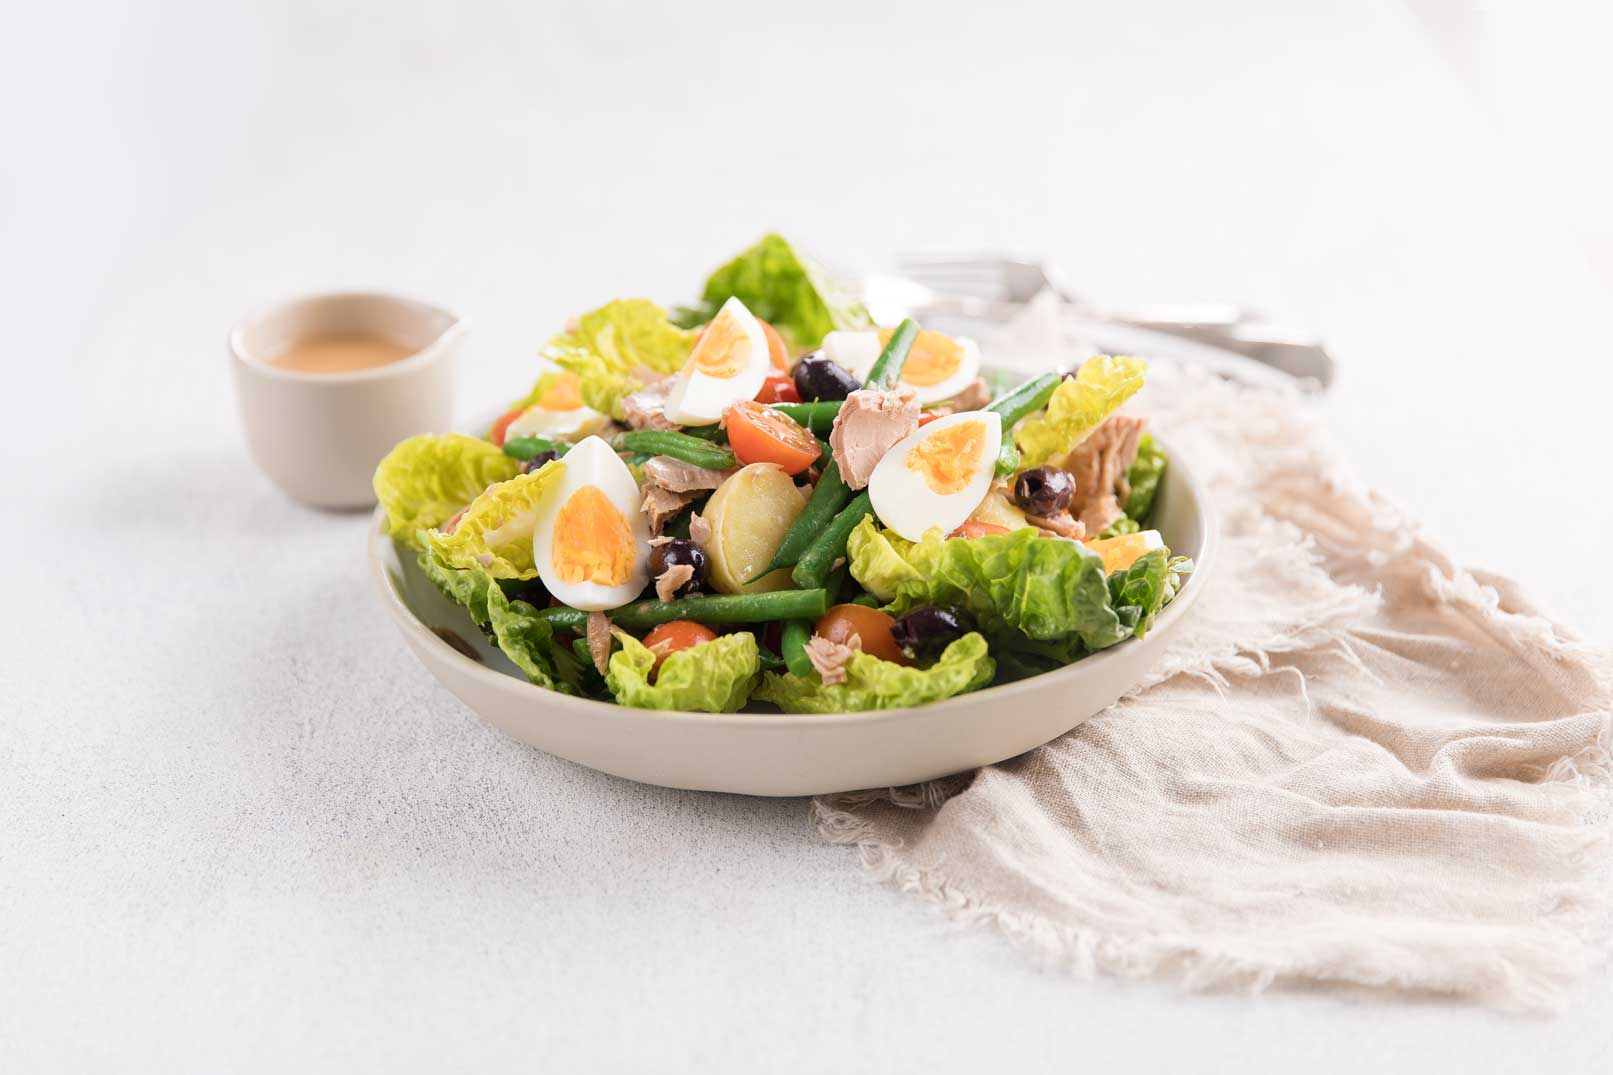 Nicoise salad in a large bowl served on a rustic cloth napkin with dressing on the side and cutlery in the background.